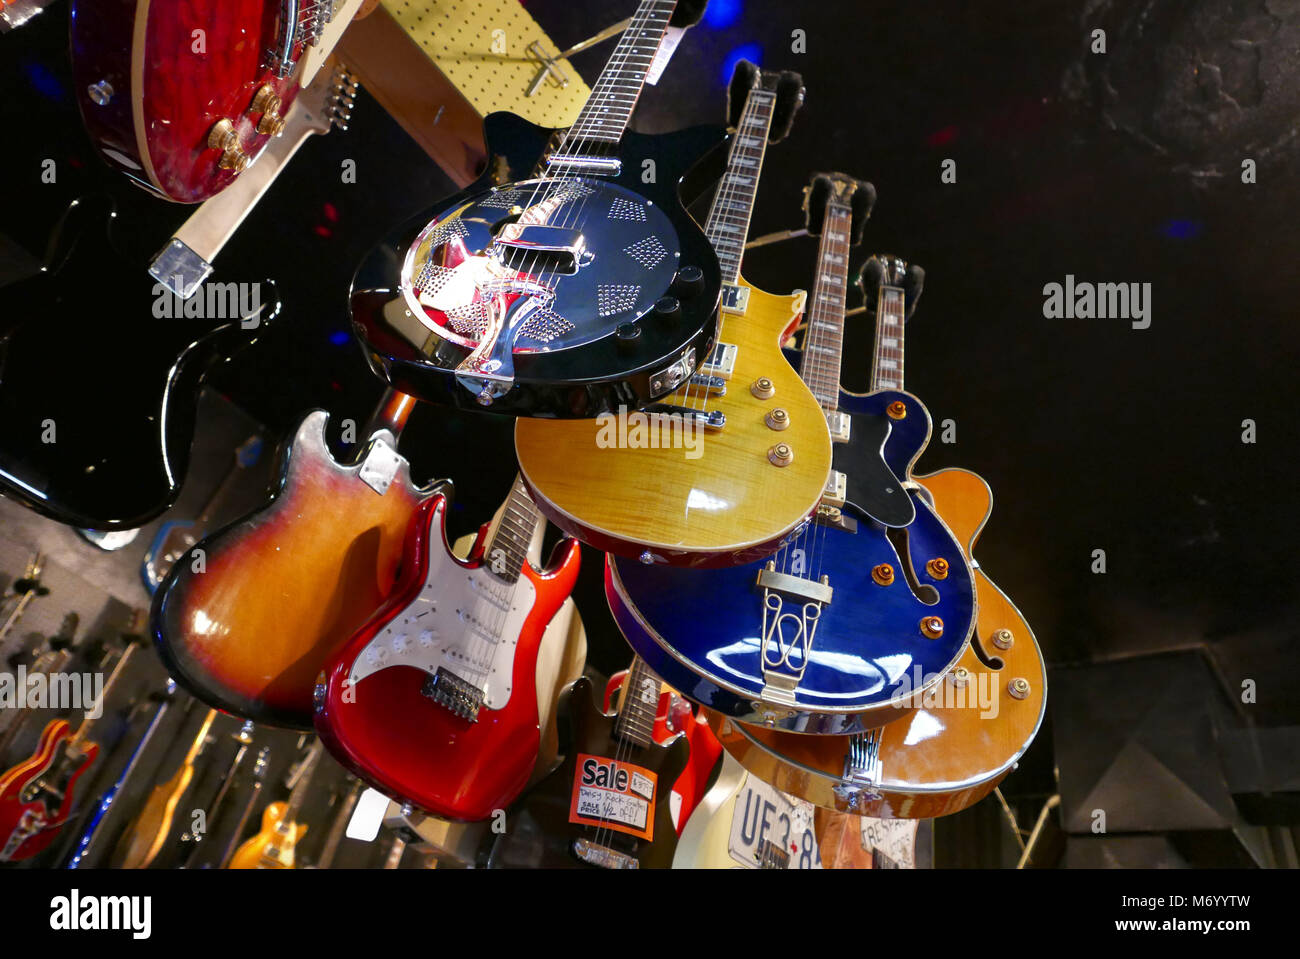 Some  of the hundreds of guitars sold at Front Porch Music on 19th Street in downtown Bakersfield.  Photo by Dennis Brack Stock Photo